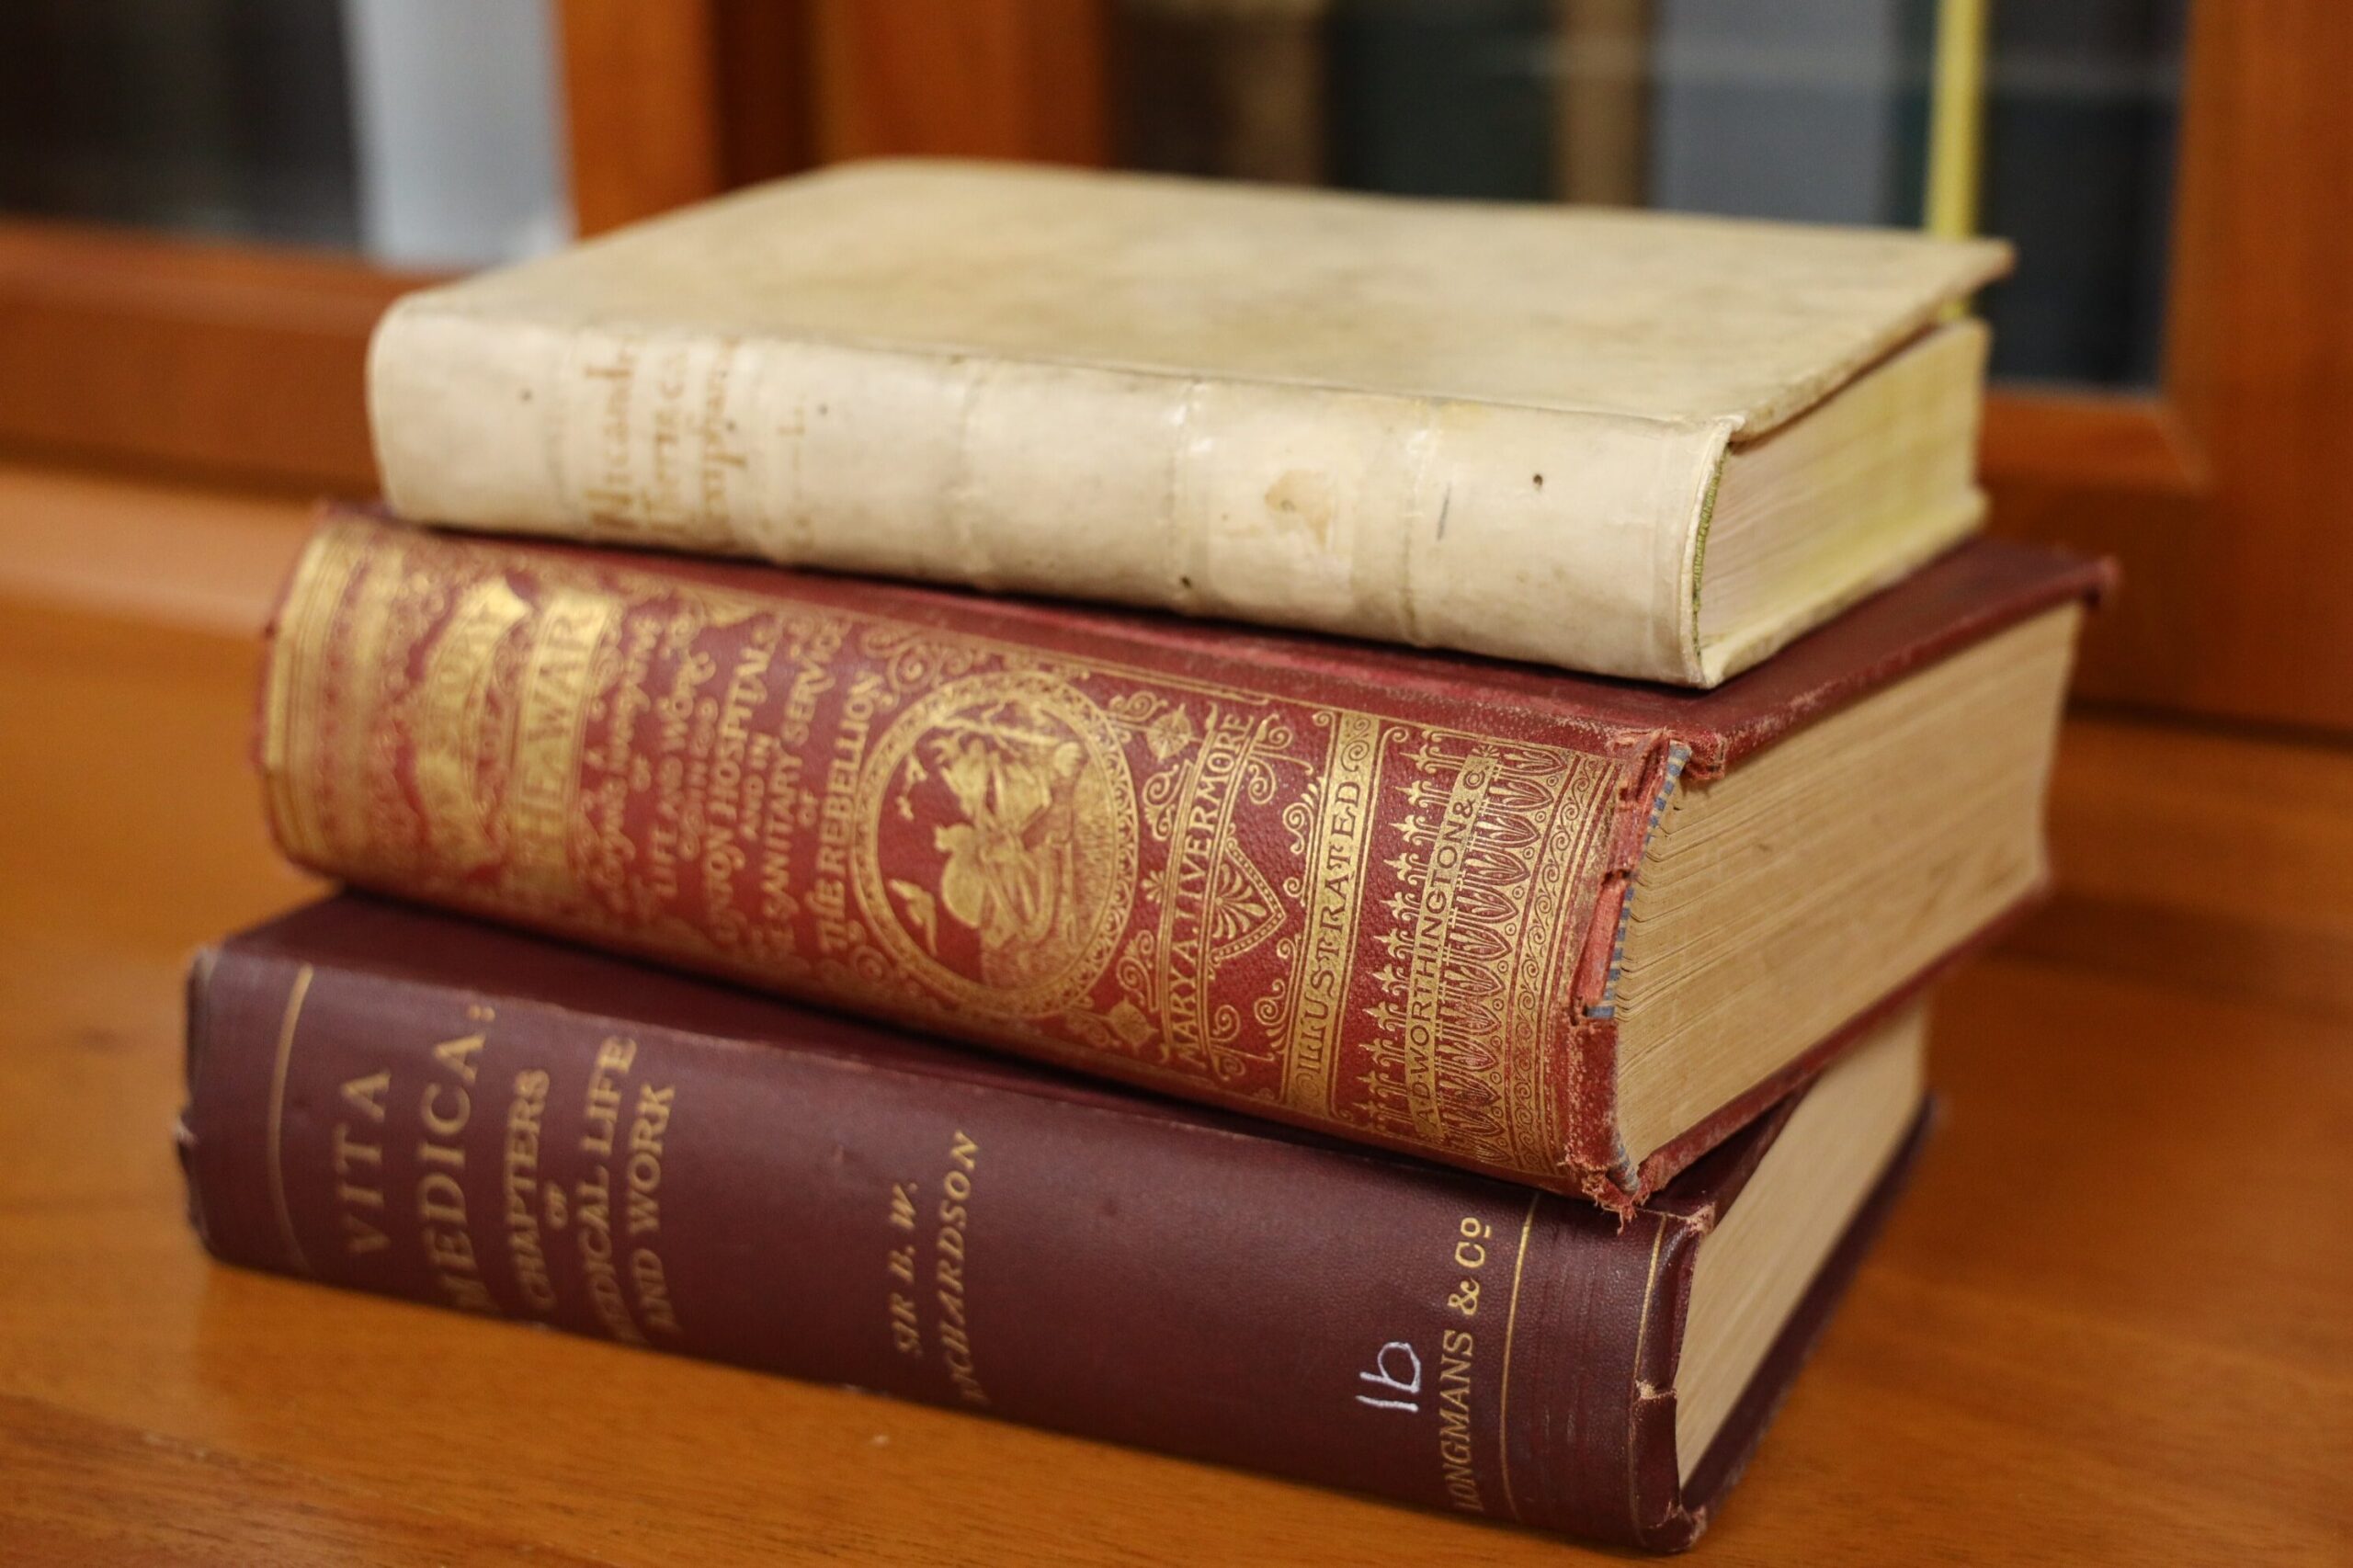 A selection of books from the Rare Book Collection.